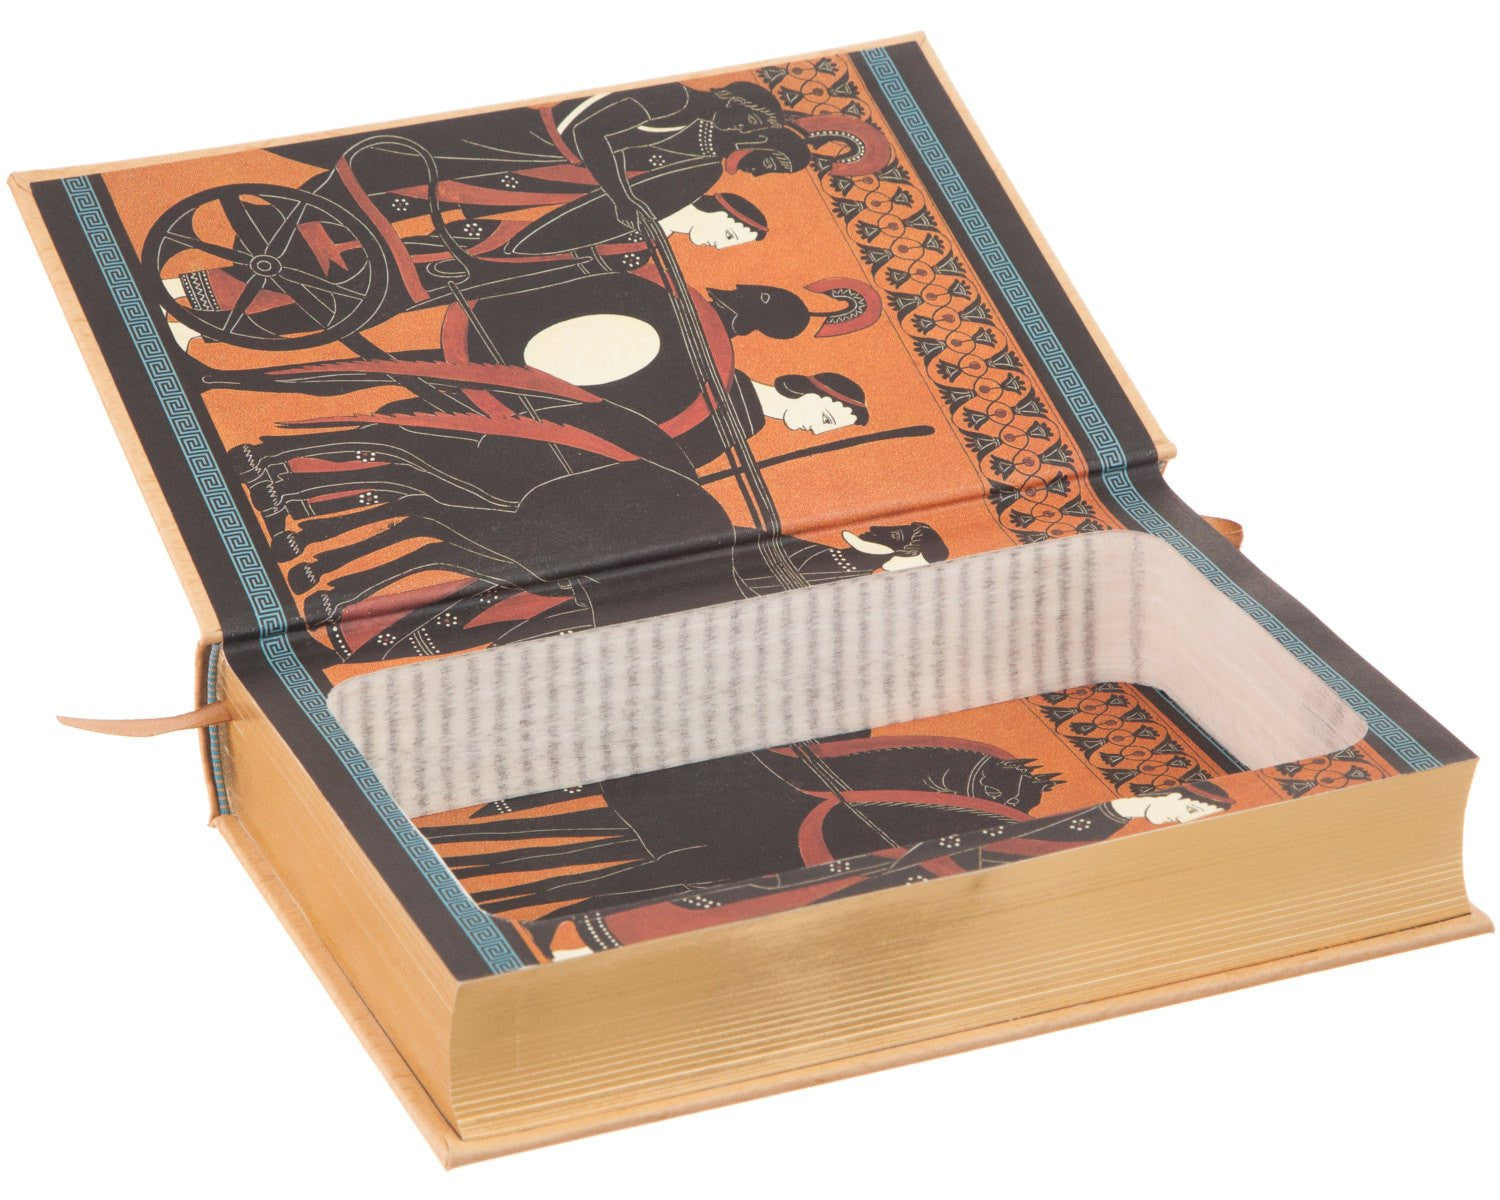 Hollow Book Safe: The Iliad and the Odyssey by Homer (Leather-bound ...